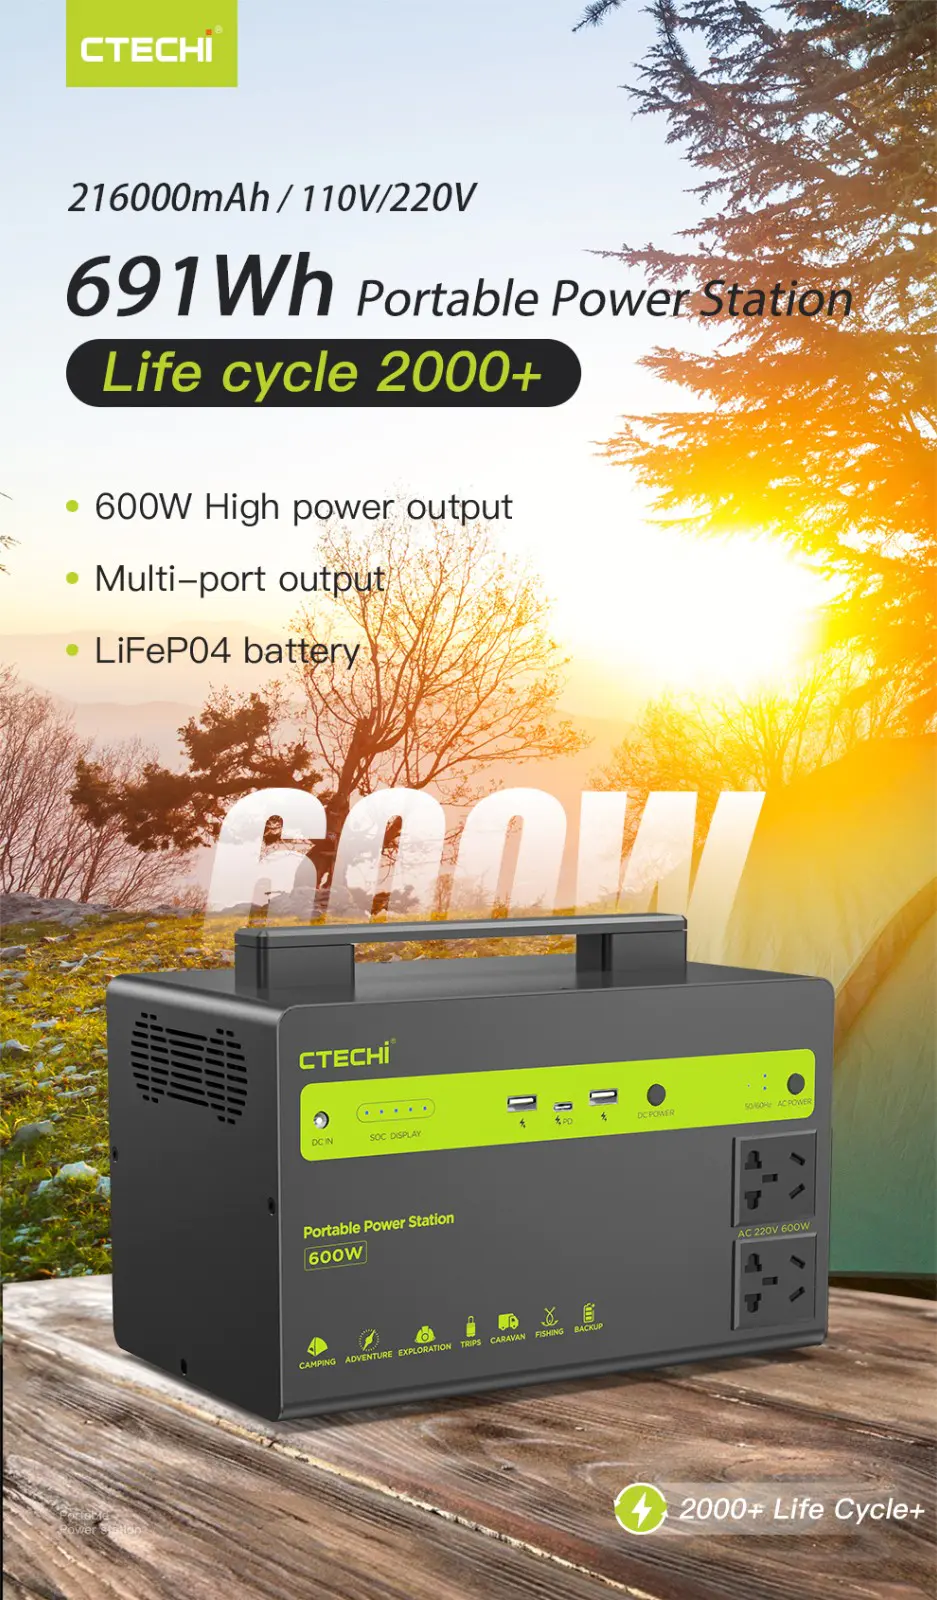 CTECHi professional outdoor power station customized for commercial